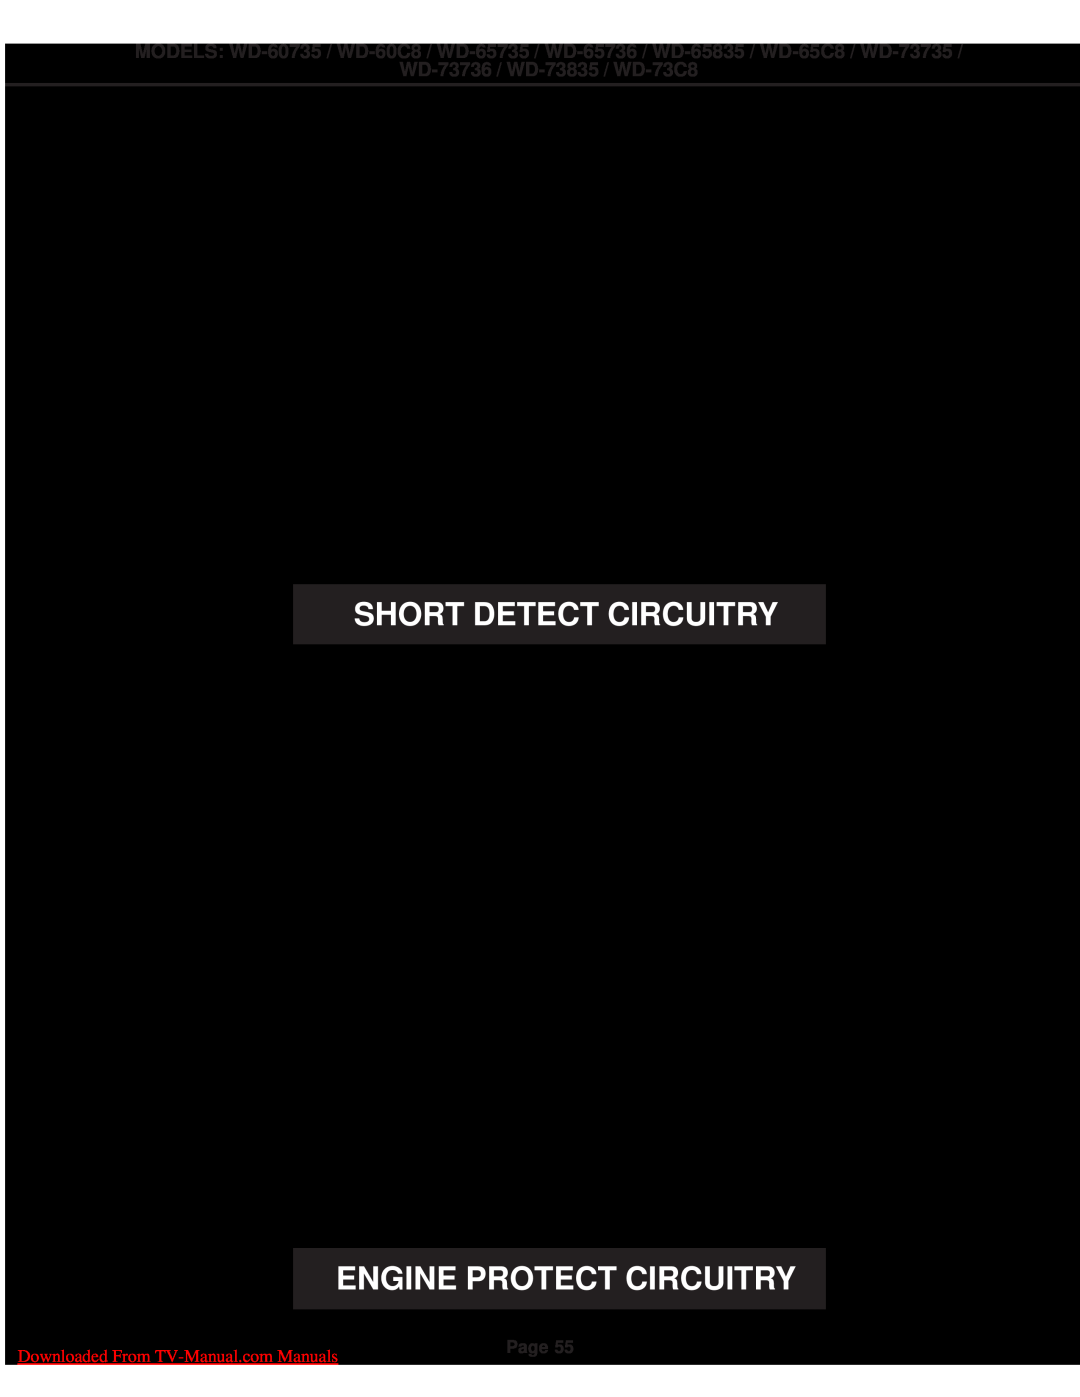 Mitsubishi Electronics WD-65835 Short Detect Circuitry Engine Protect Circuitry, WD-73736 / WD-73835 / WD-73C8, Page 